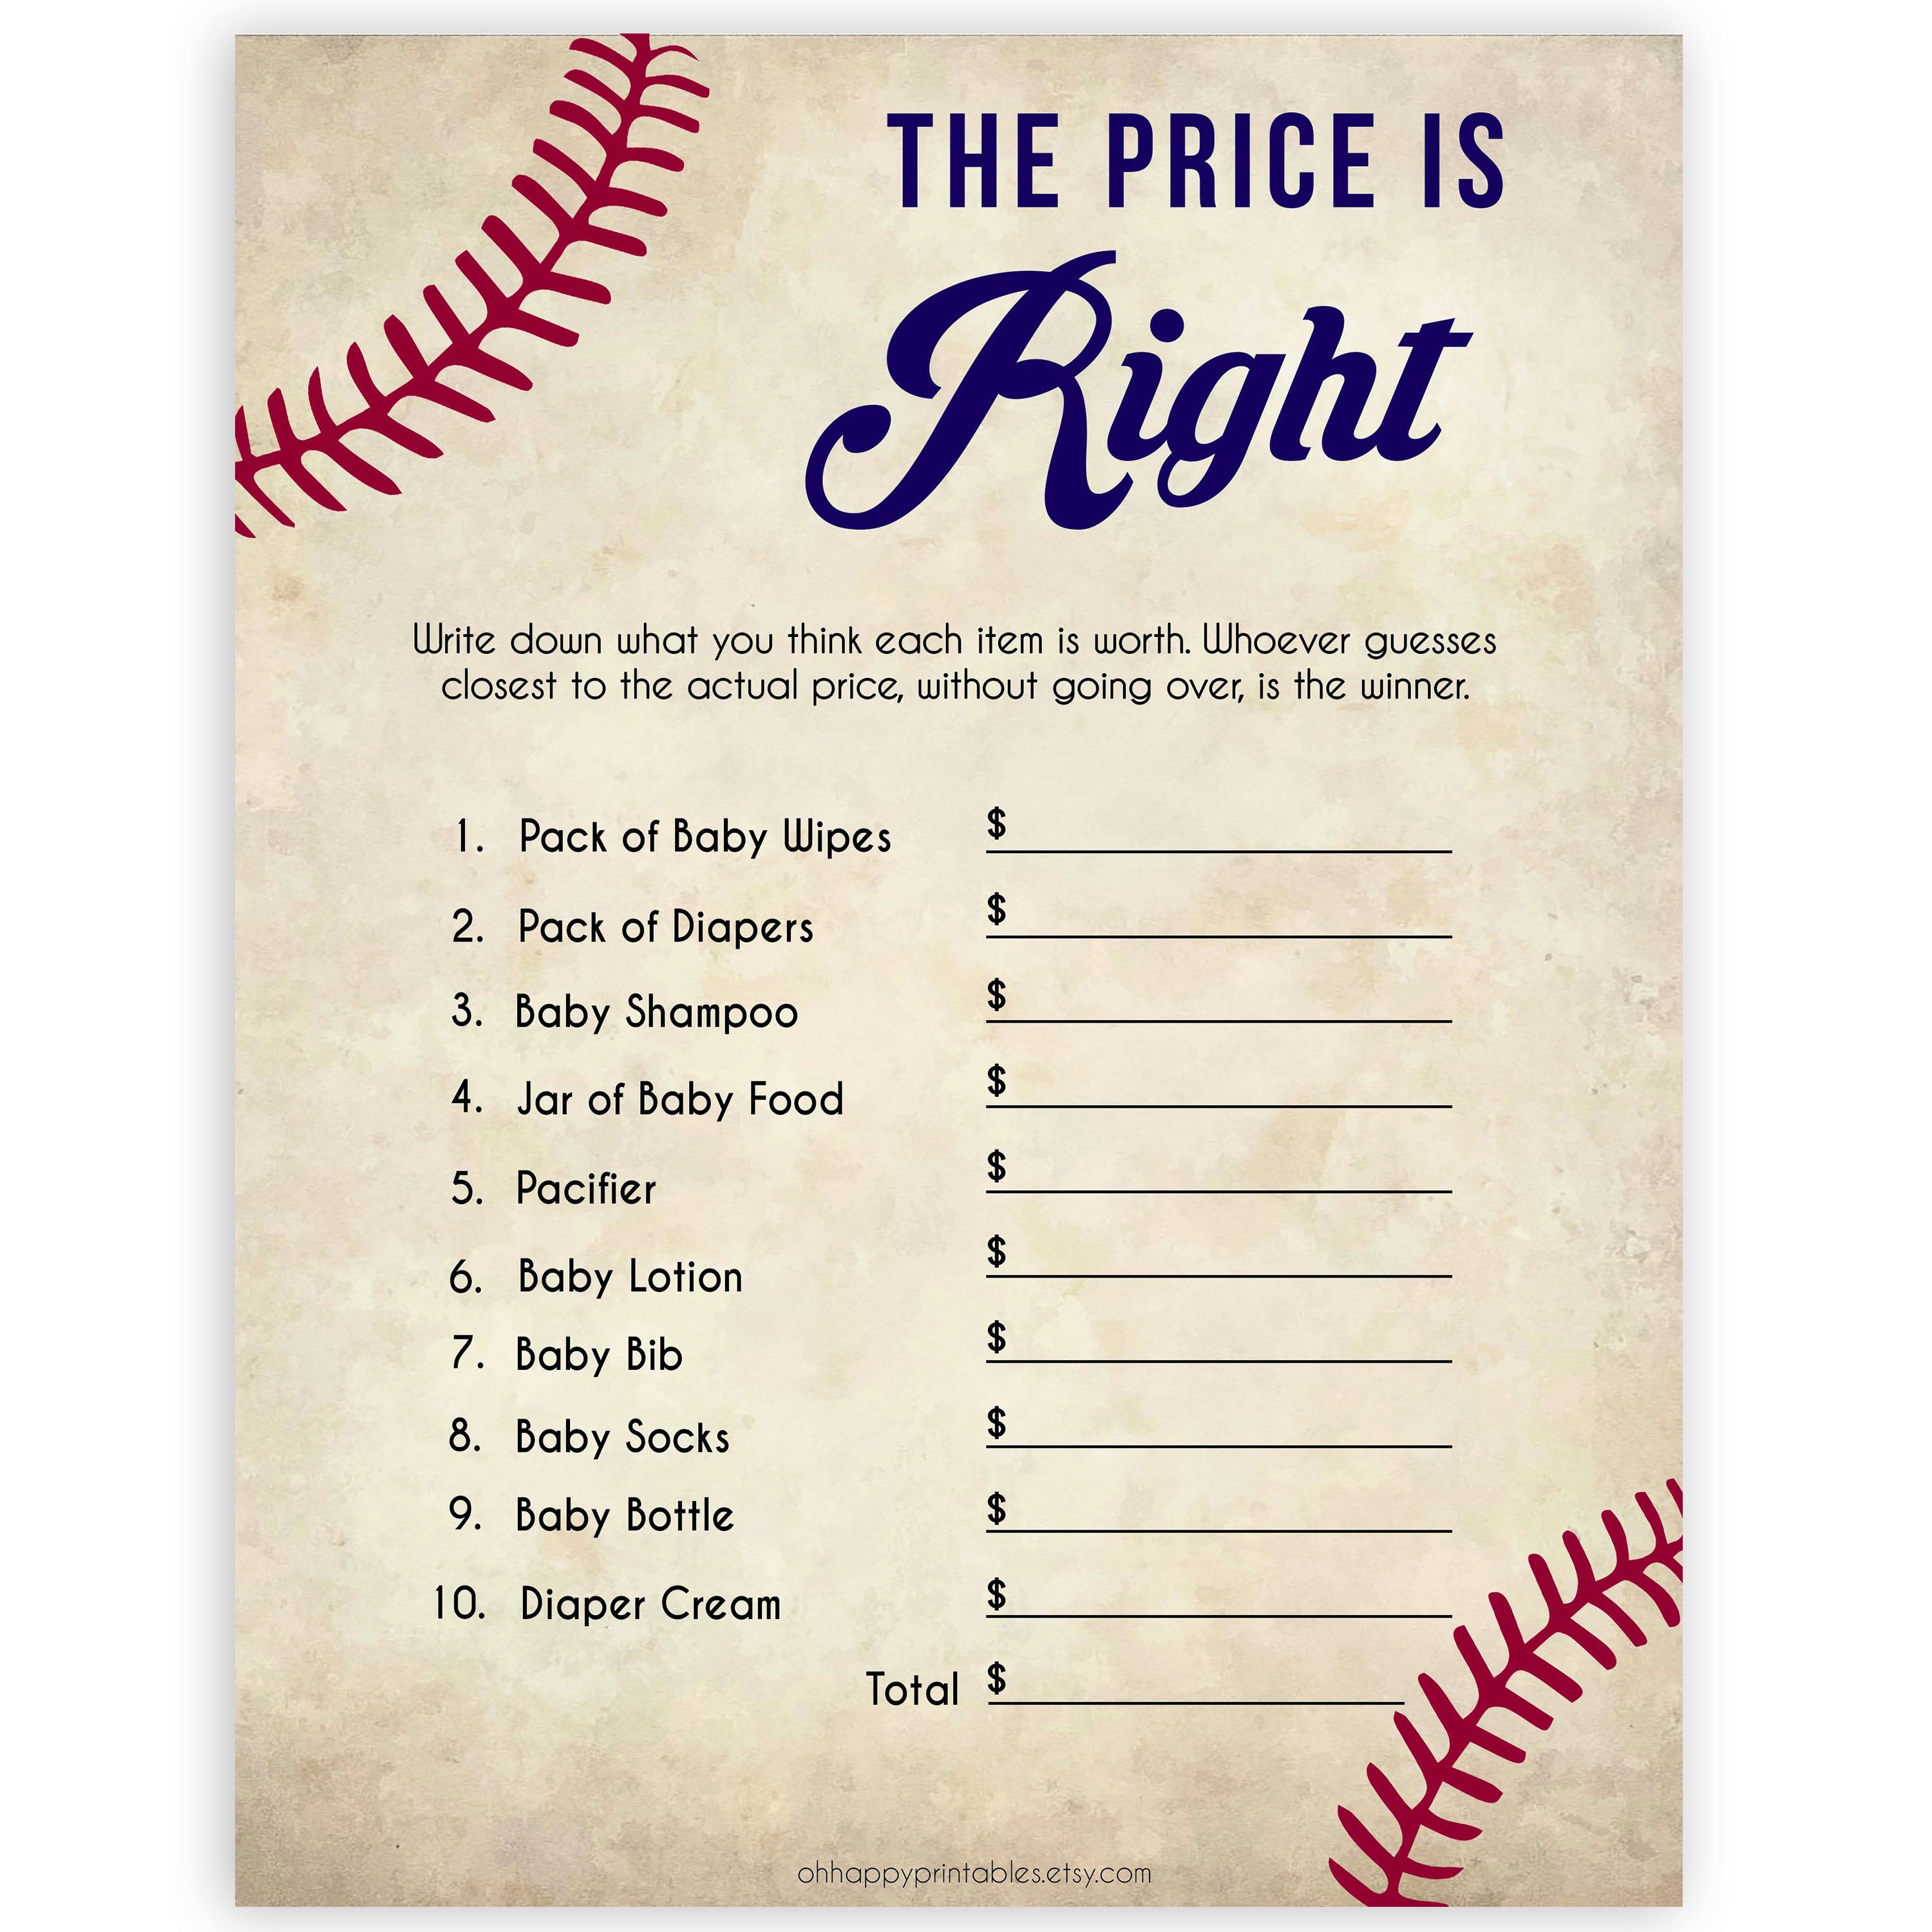 Baseball Price Is Right Baby Shower Game, Guess The Price Games, Baby Shower Price Games, Price Is Right Game, Baby Price Is Right, printable baby shower games, fun baby shower games, popular baby shower games